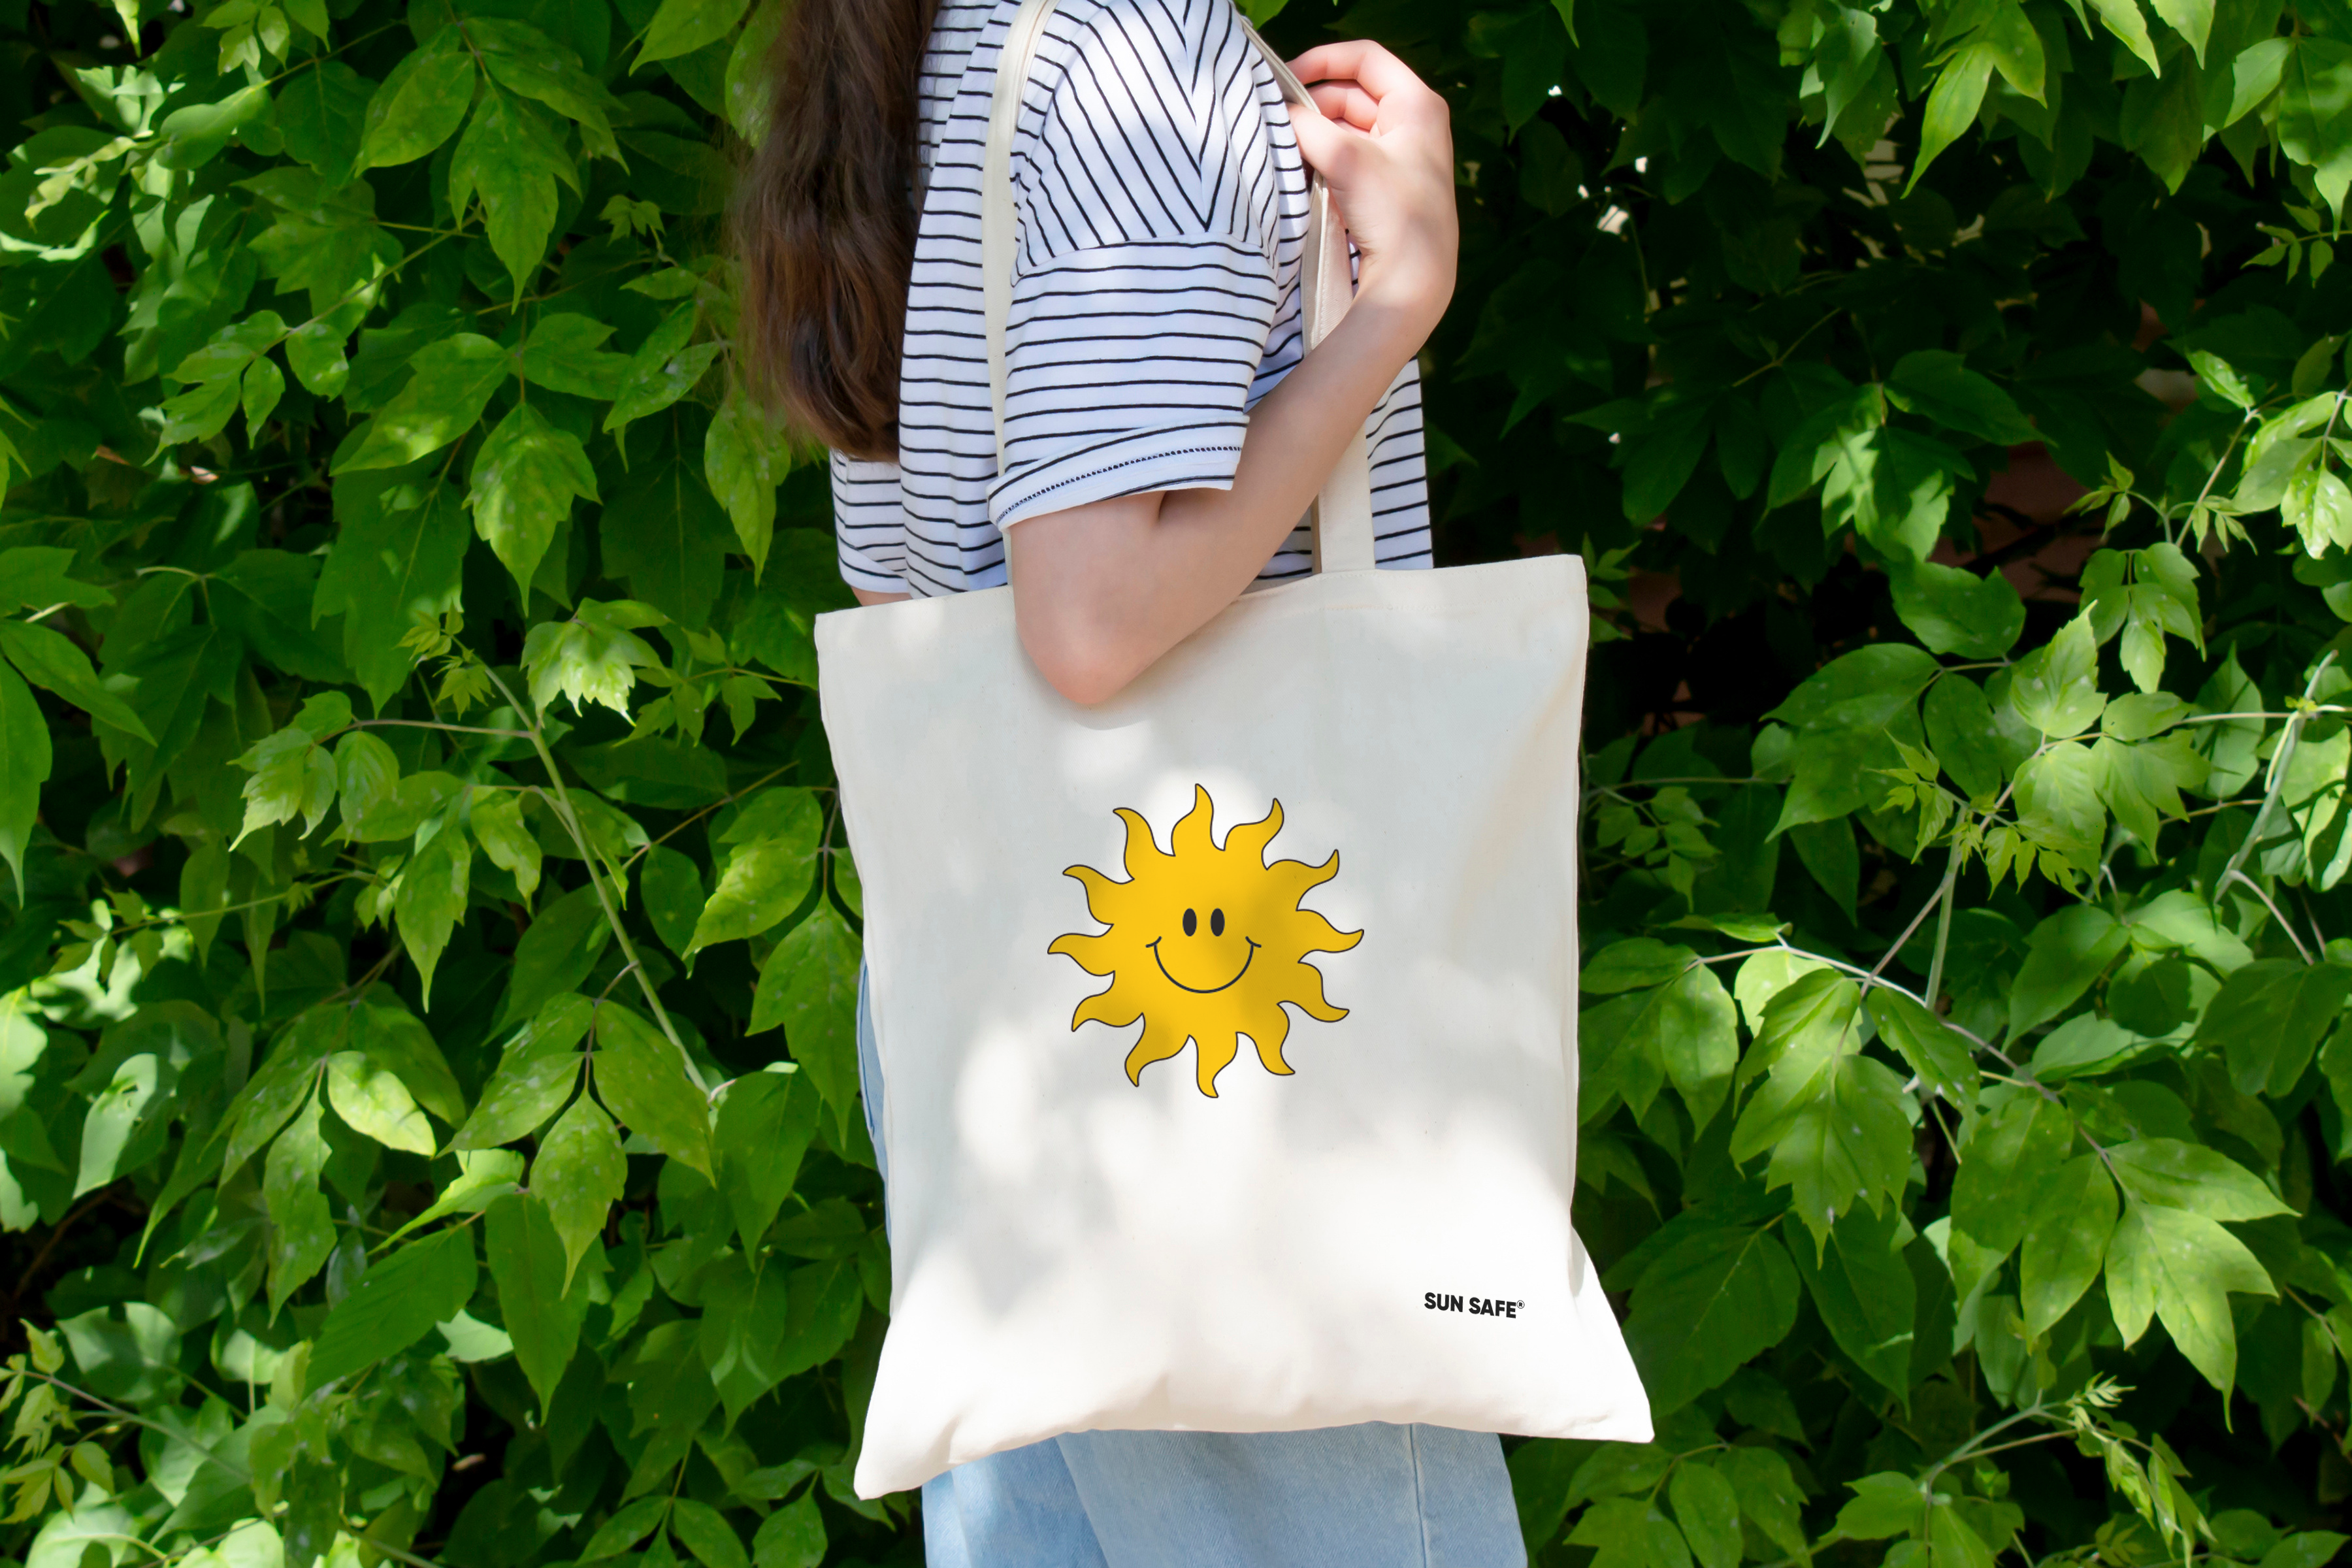 Person holding a tote bag with a graphic sun and the branded words sunsafe. Leafy green vines in the background.